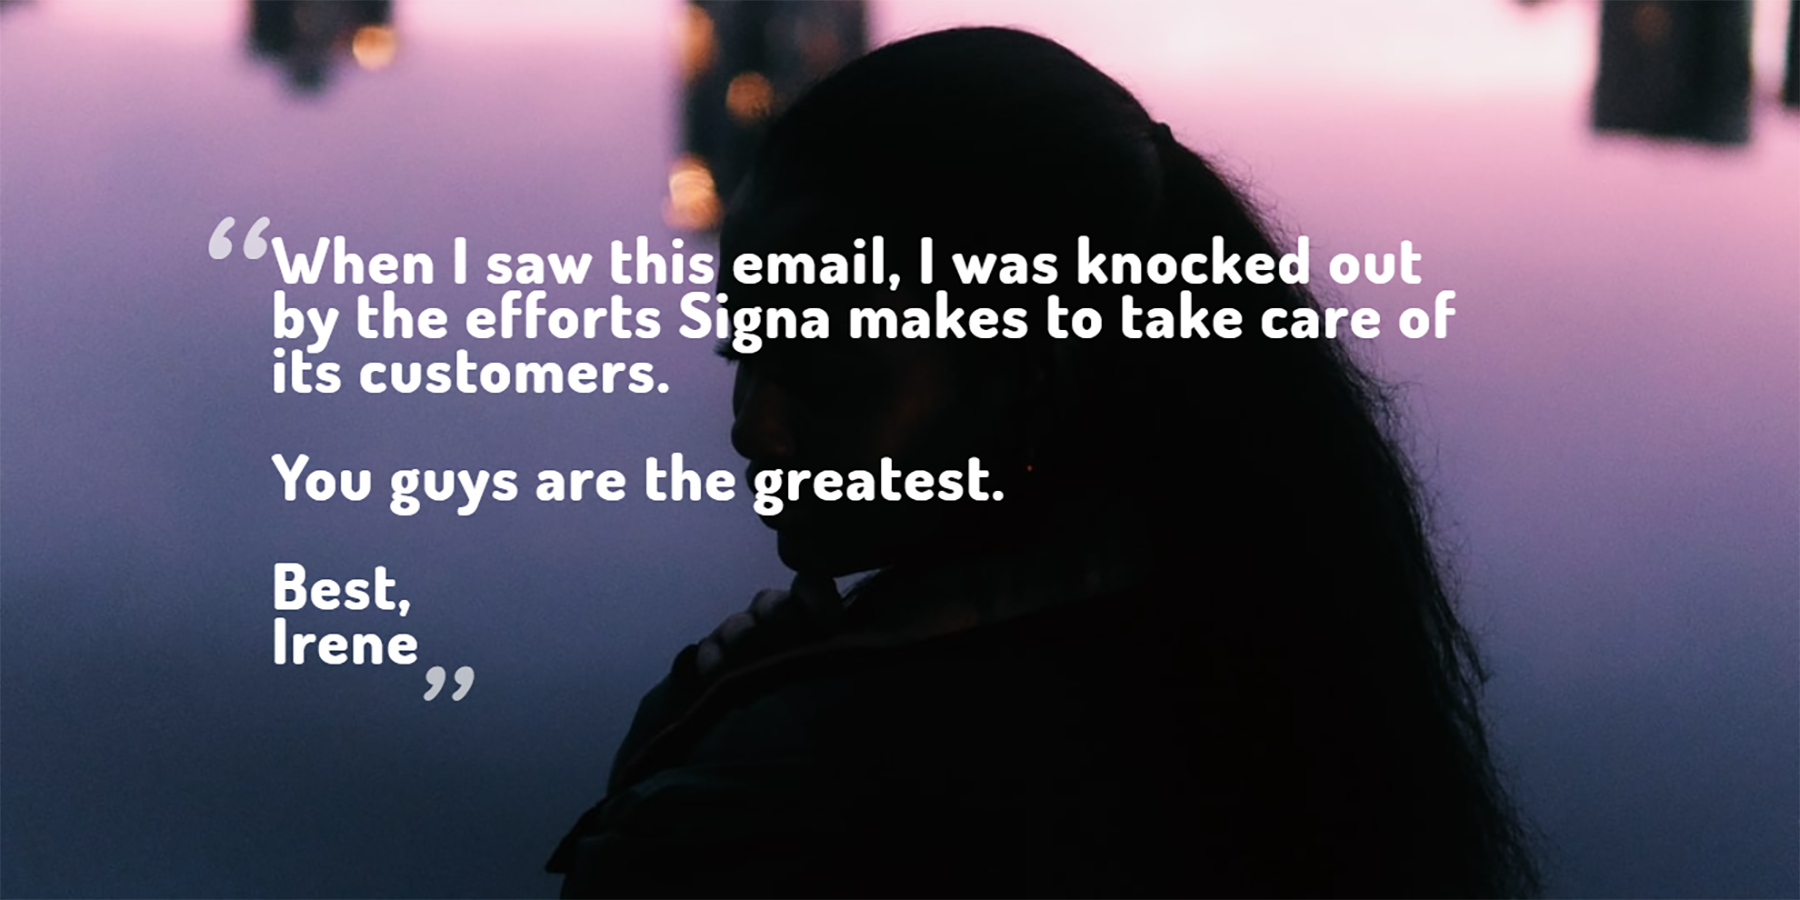 Customers are loving Signa's new Mobile Service!